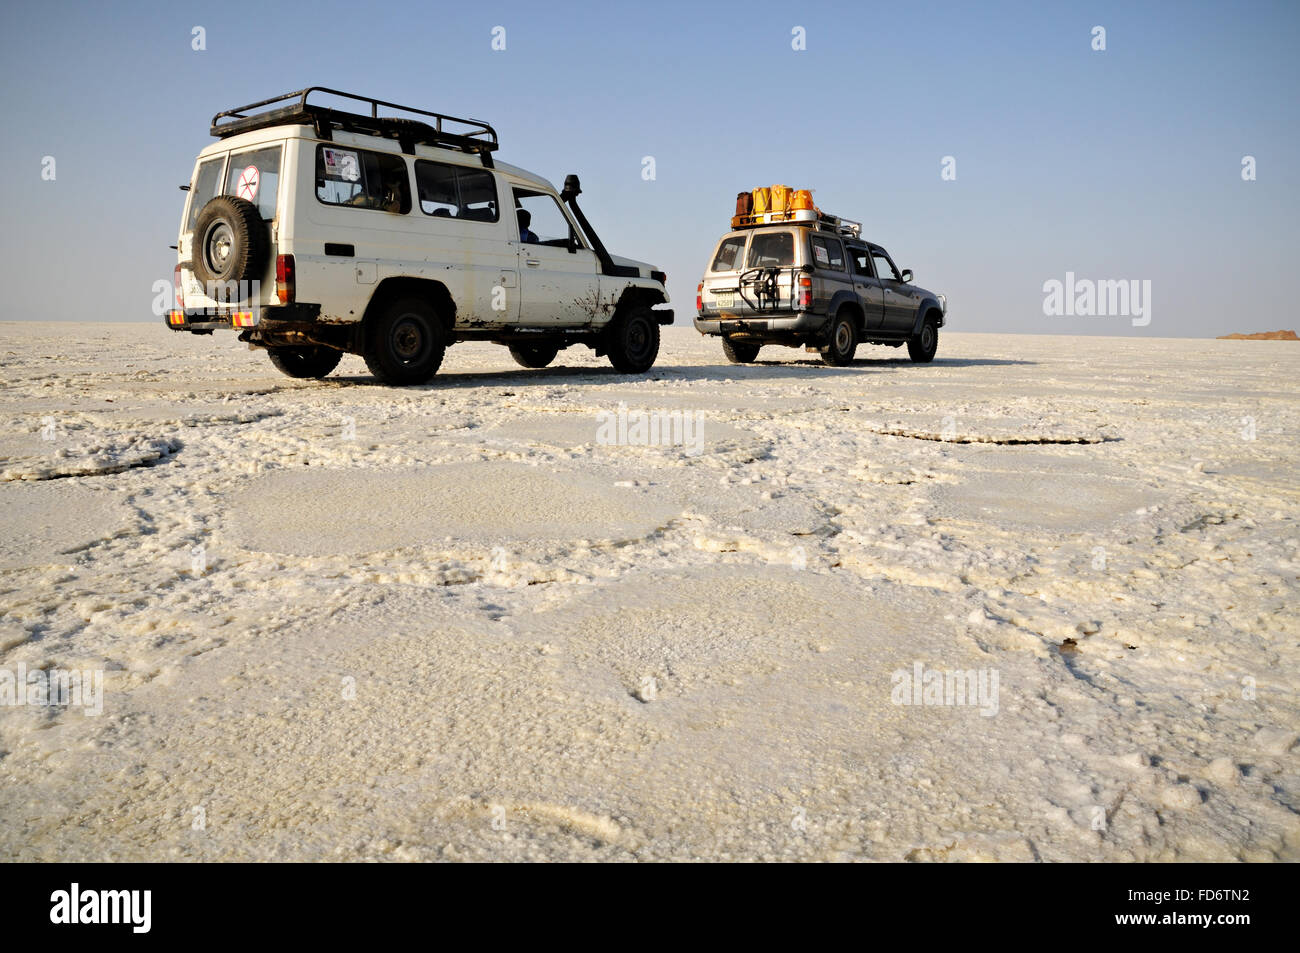 Two Toyota off-road vehicles on Lake Assale in the Danakil depression, Afar Region, Ethiopia Stock Photo